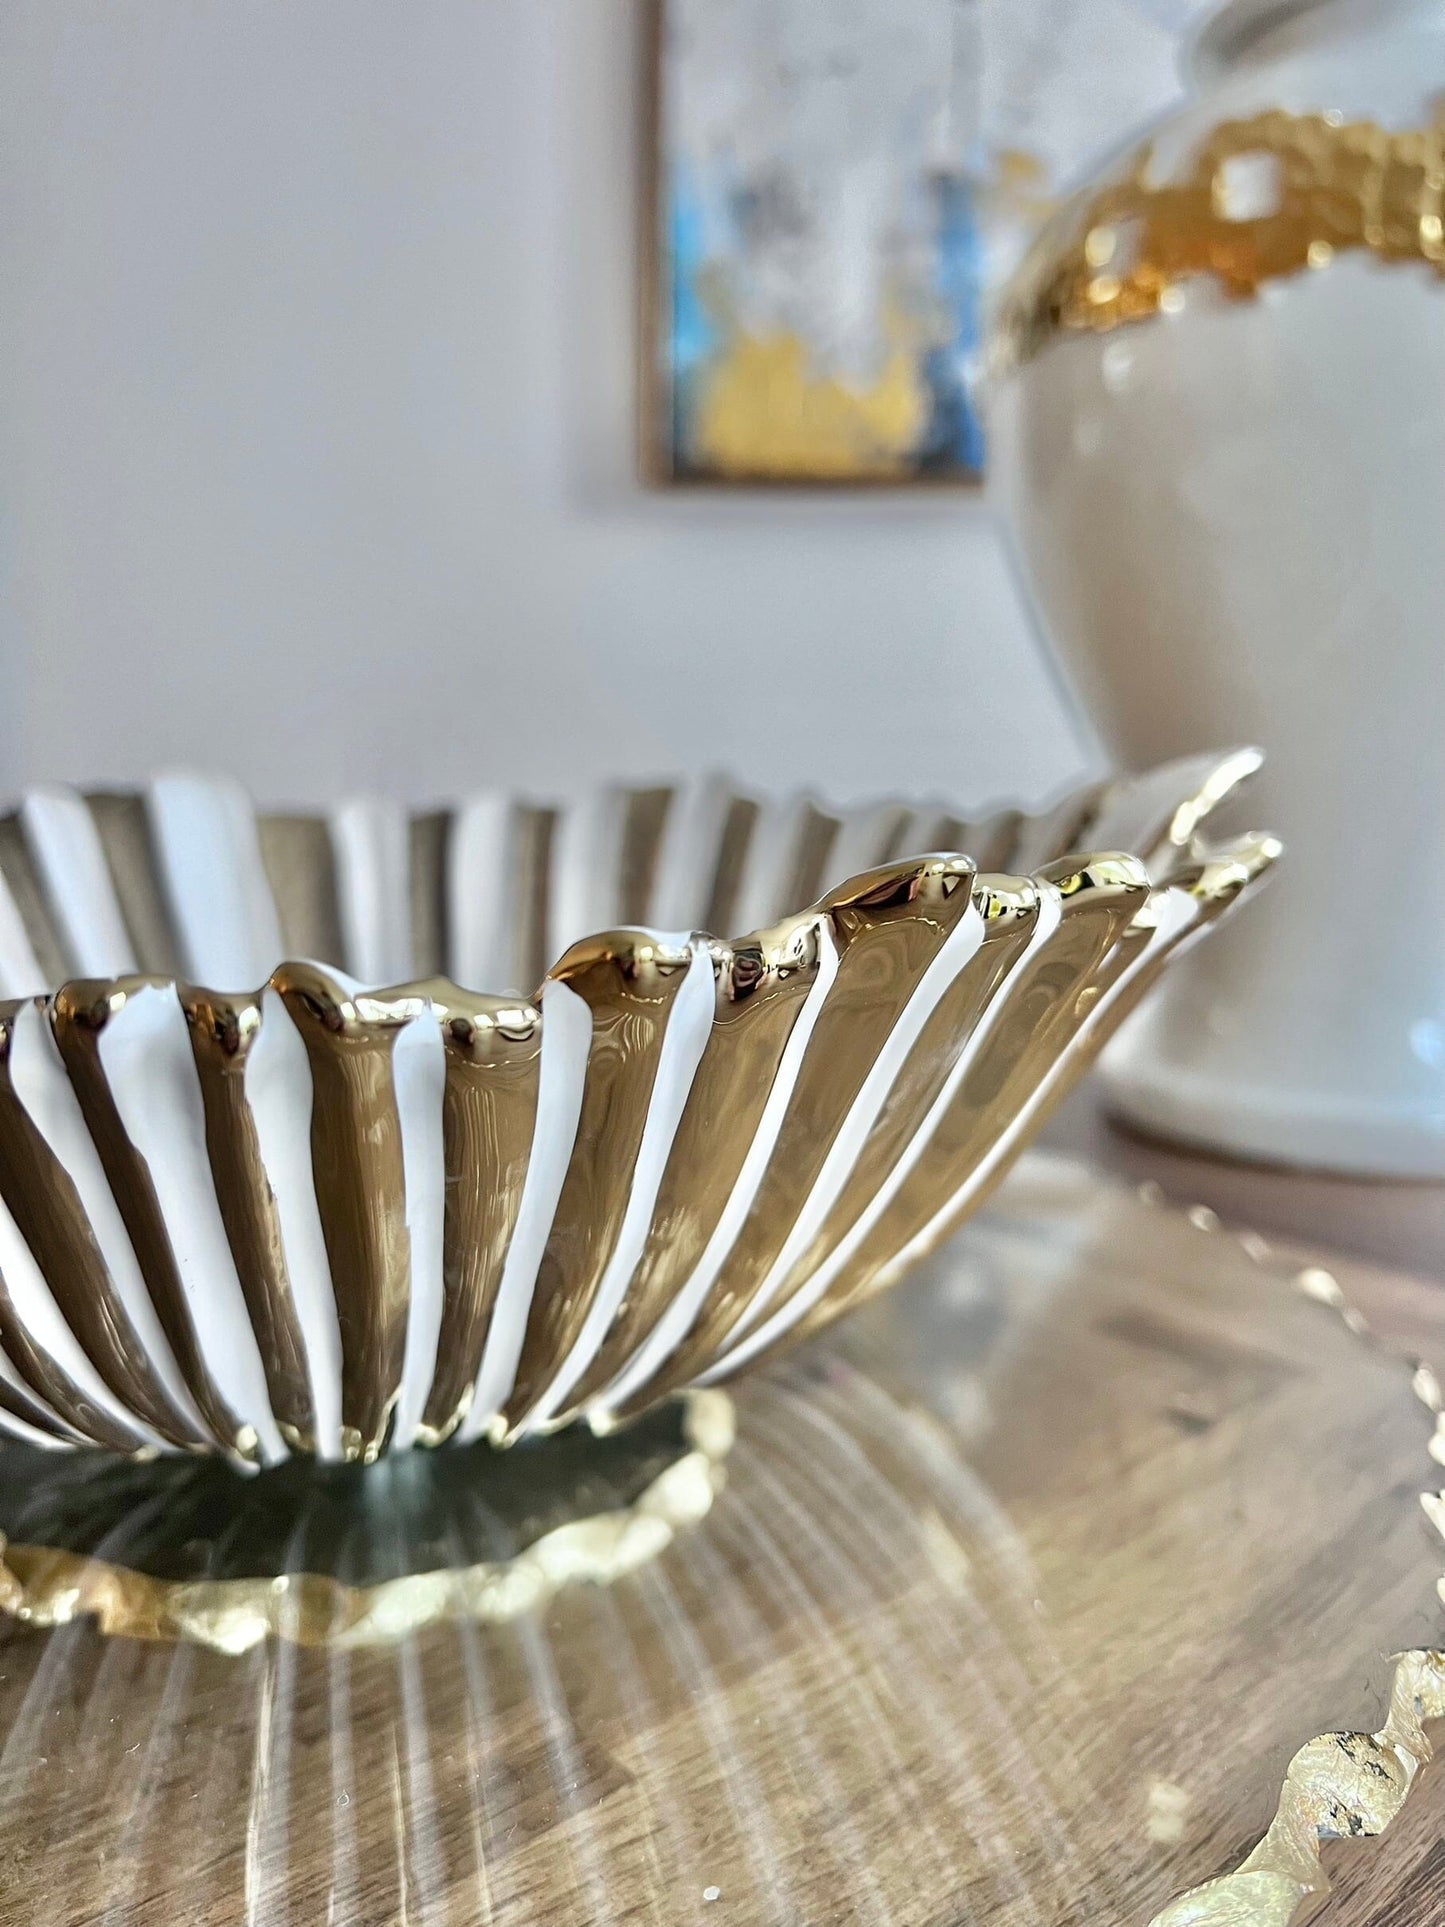 White and Gold Striped Flower Shaped Salad Bowl Decorative Bowls High Class Touch - Home Decor 